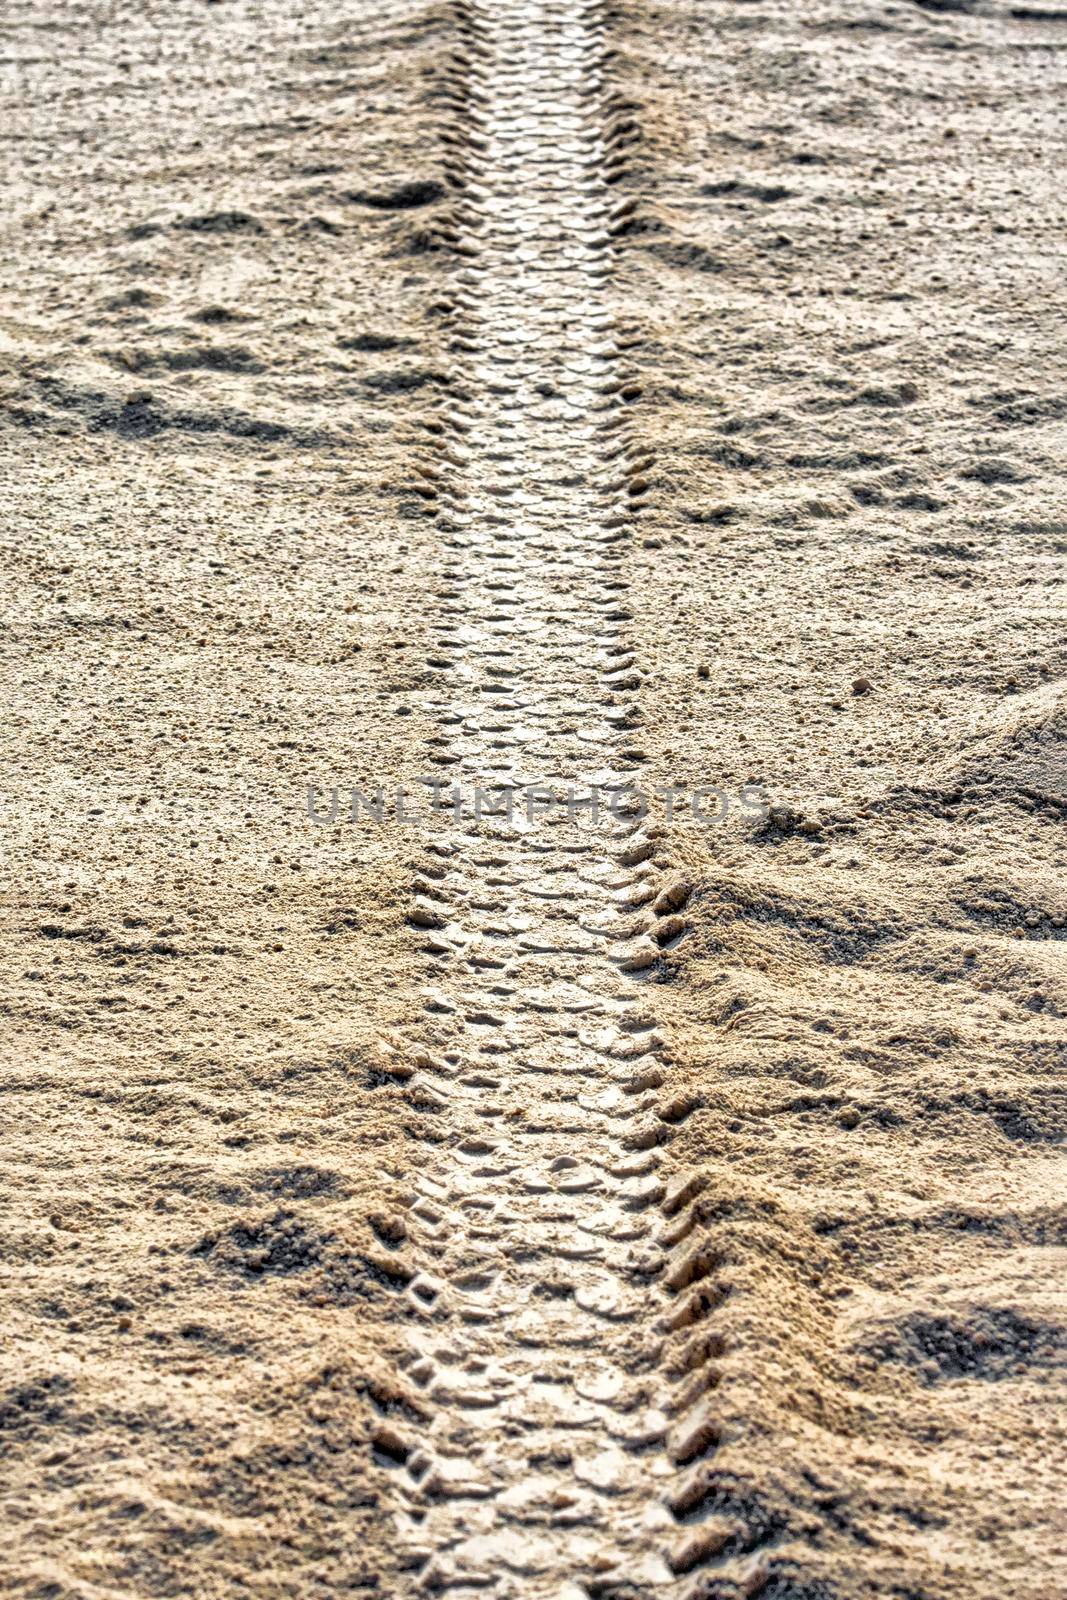 Tire tracks on dirt by toa55